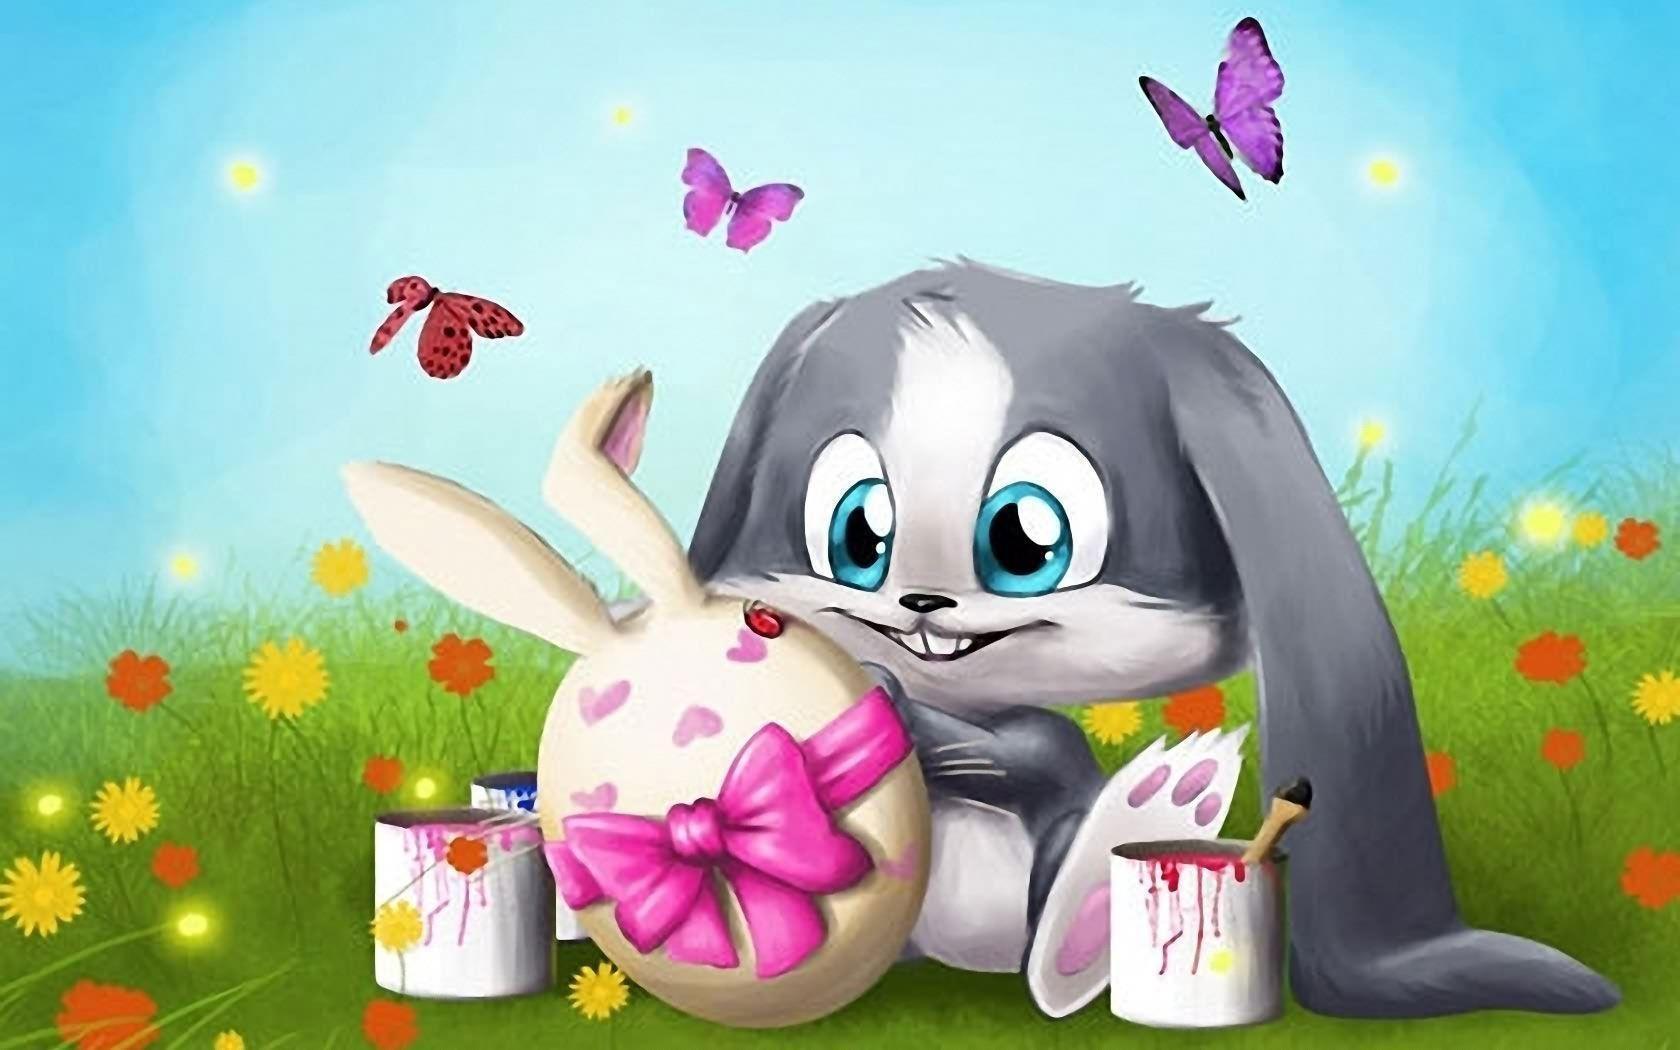 Happy Easter wallpaper (30 picture)